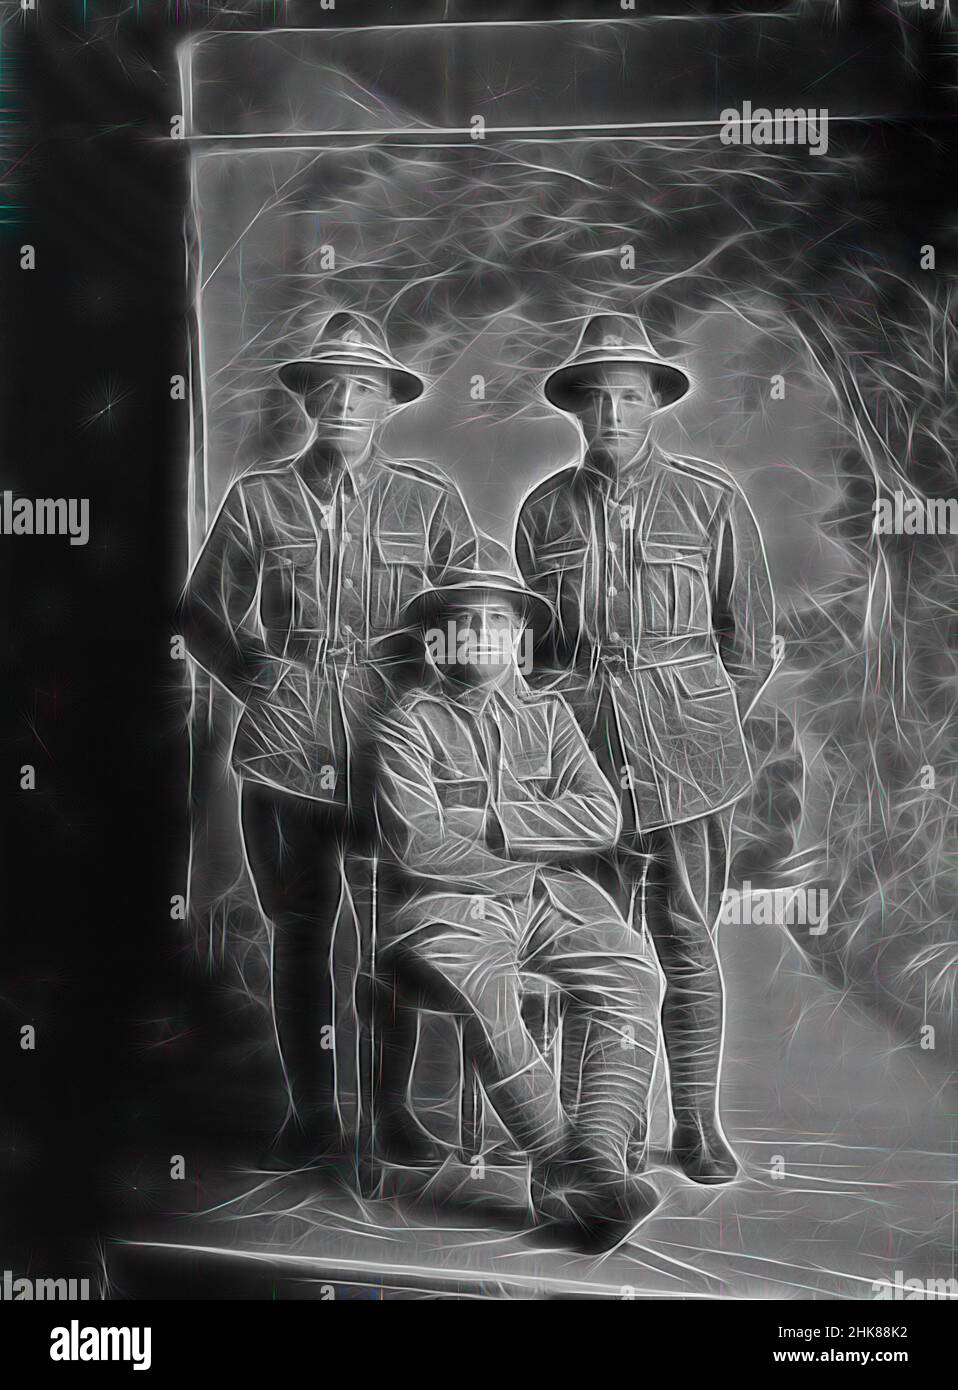 Inspired by Thomas Fleming Stewart with two other soldiers, Berry & Co, photography studio, 1917, Wellington, Thomas Fleming Stewart, service number 39909, Reimagined by Artotop. Classic art reinvented with a modern twist. Design of warm cheerful glowing of brightness and light ray radiance. Photography inspired by surrealism and futurism, embracing dynamic energy of modern technology, movement, speed and revolutionize culture Stock Photo